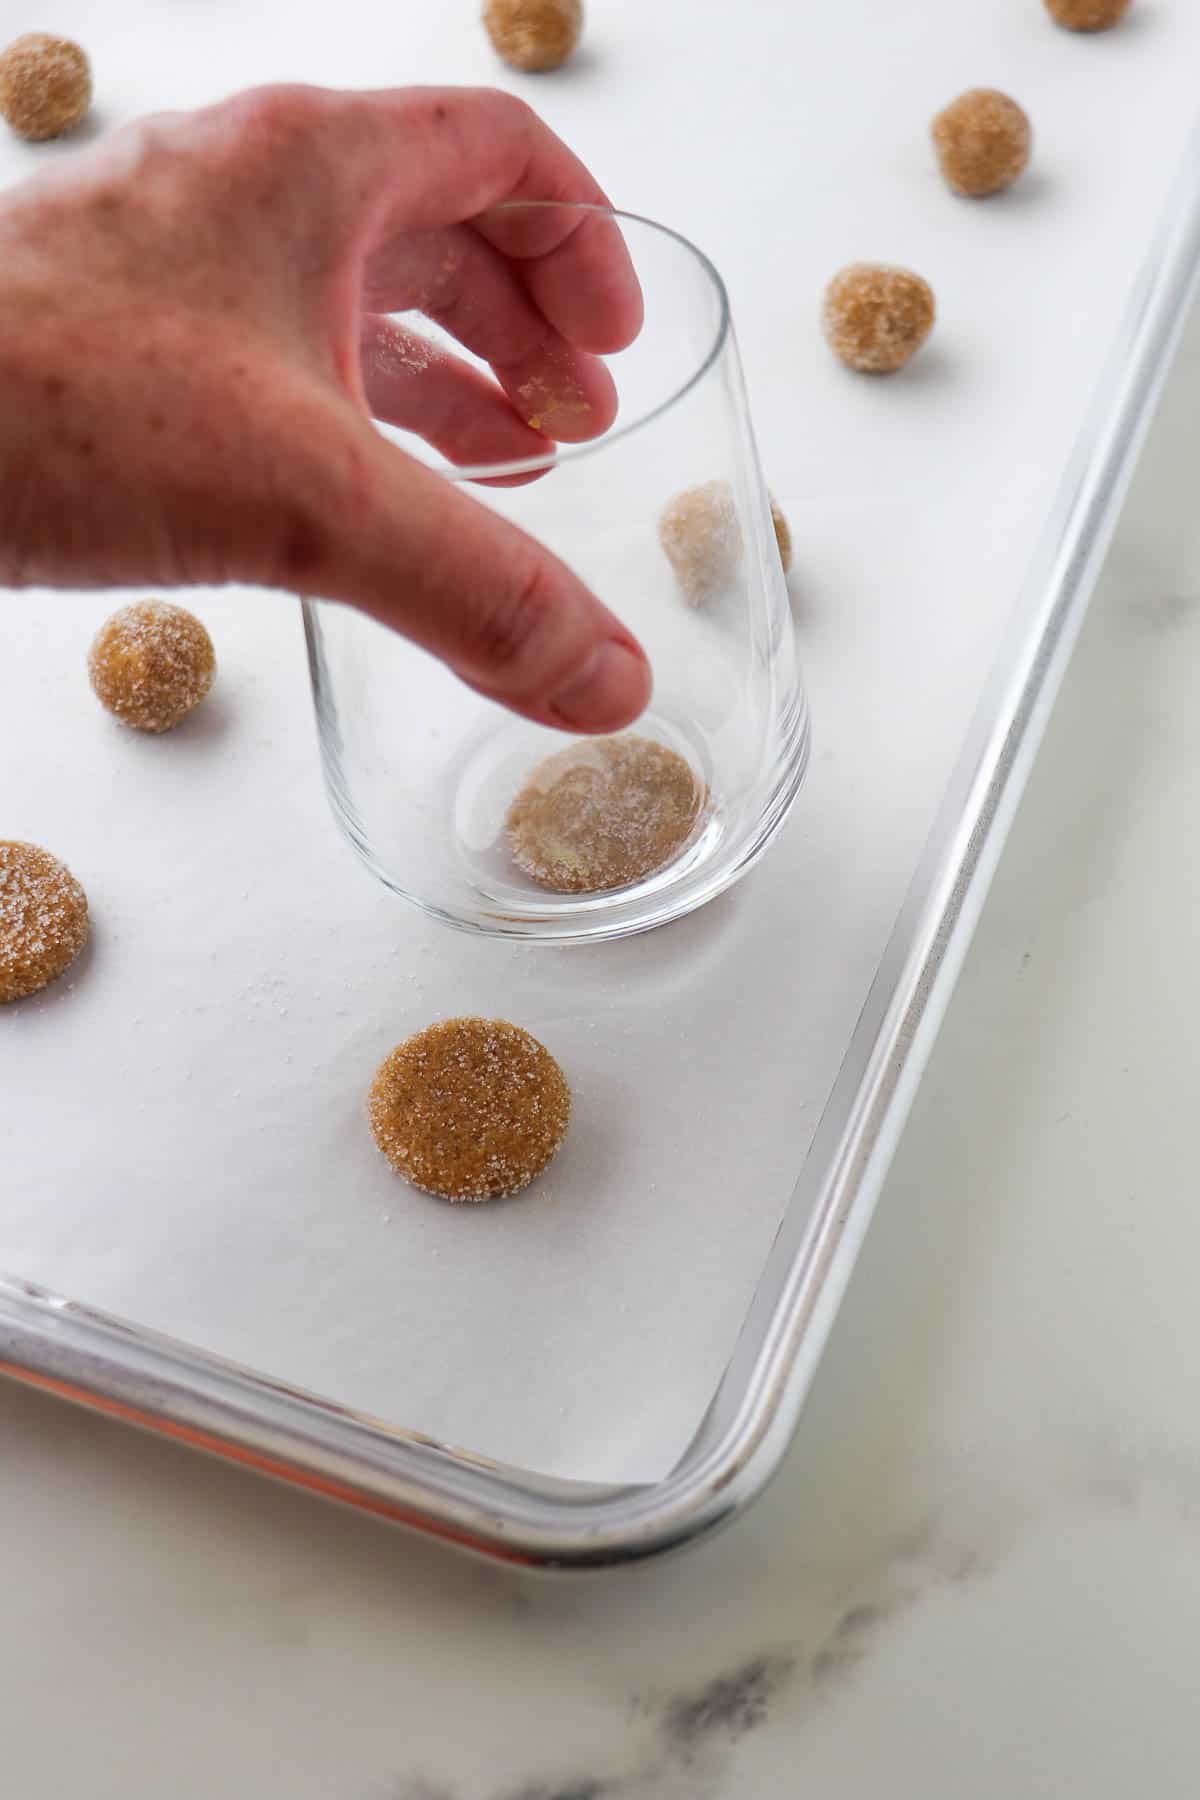 Person pressing a glass down on Swedish Ginger Cookies dough balls.